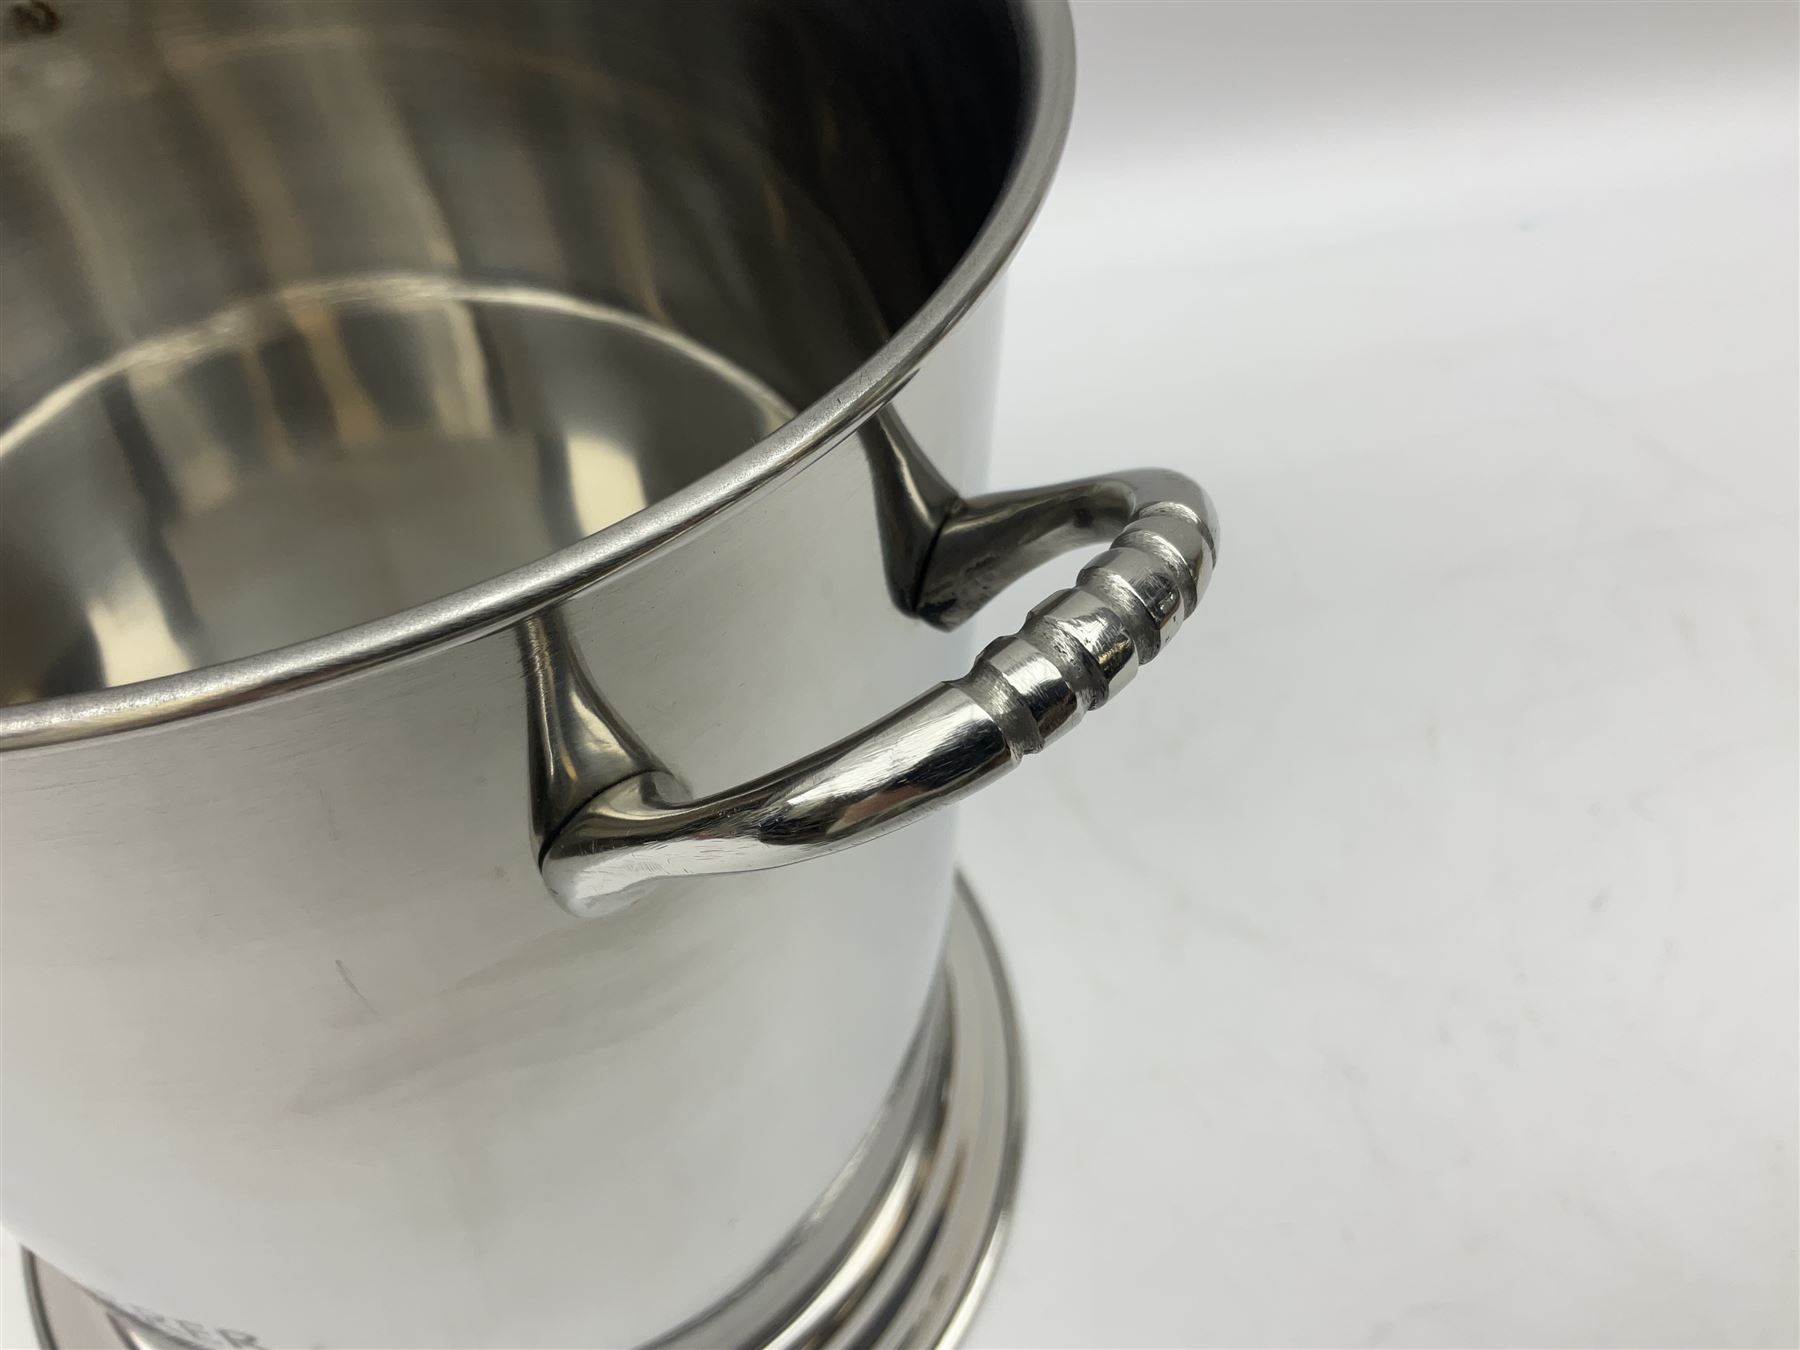 Lois Roederer champagne bucket of cylindrical form with twin handles - Image 4 of 6